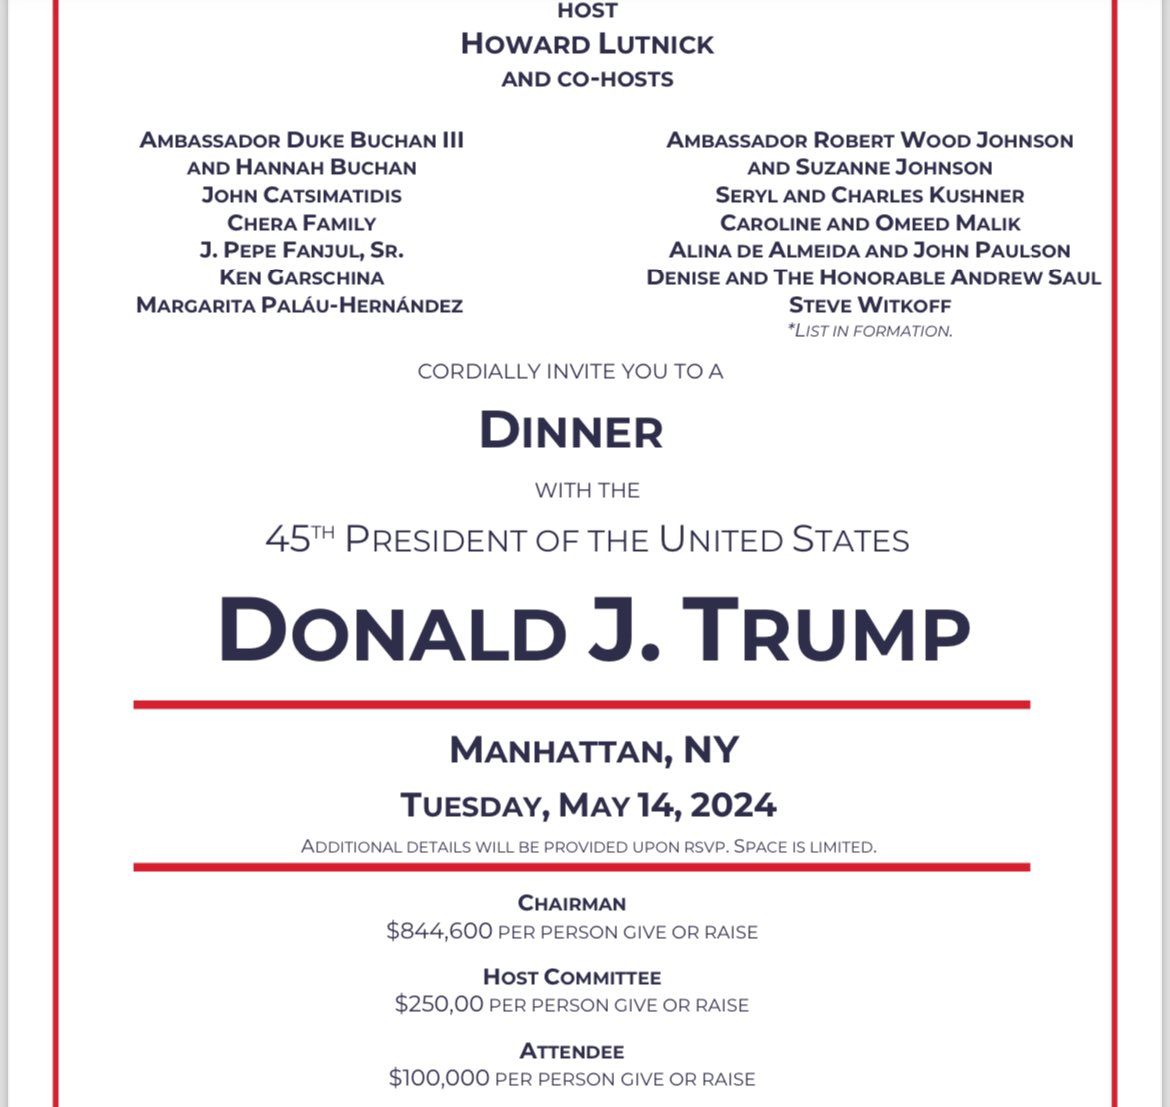 Trump is holding a fundraiser in mid May in NYC amid being in NYC for his trial, with hosts including Lutnick, Witkoff and the Kushners